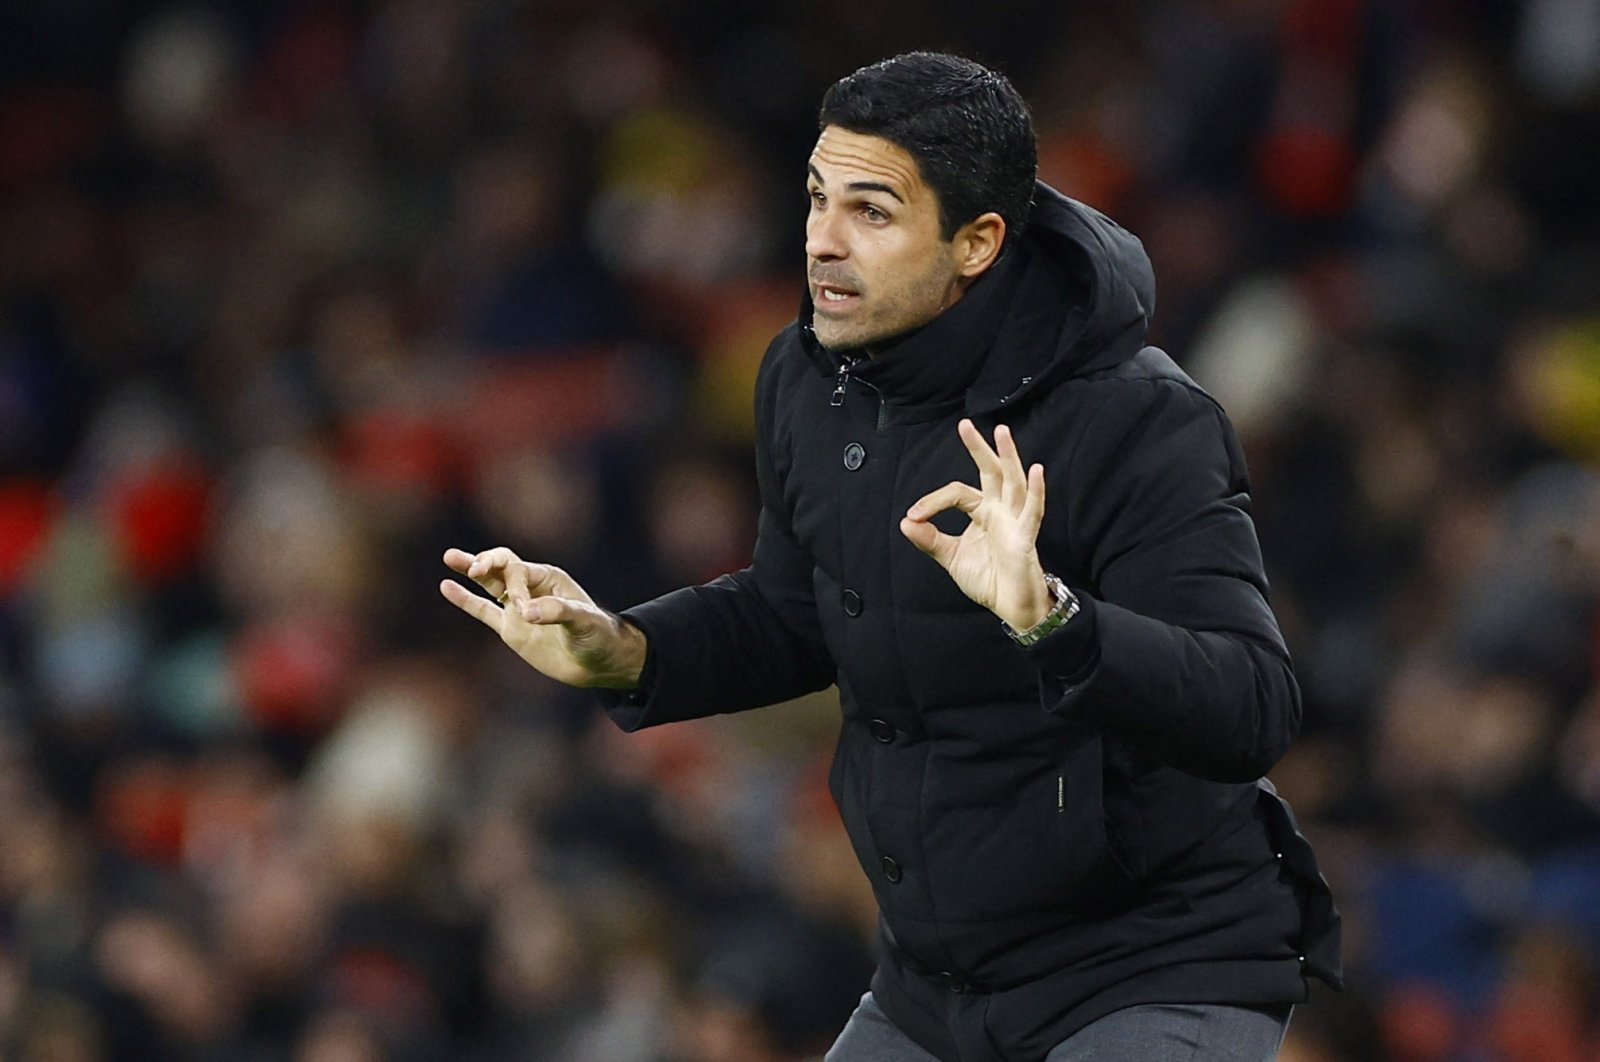 Arsenal manager Mikel Arteta in action during a friendly match between Arsenal and Juventus at the Emirates Stadium, London, United Kingdom, Dec. 17, 2022. (Reuters Photo)